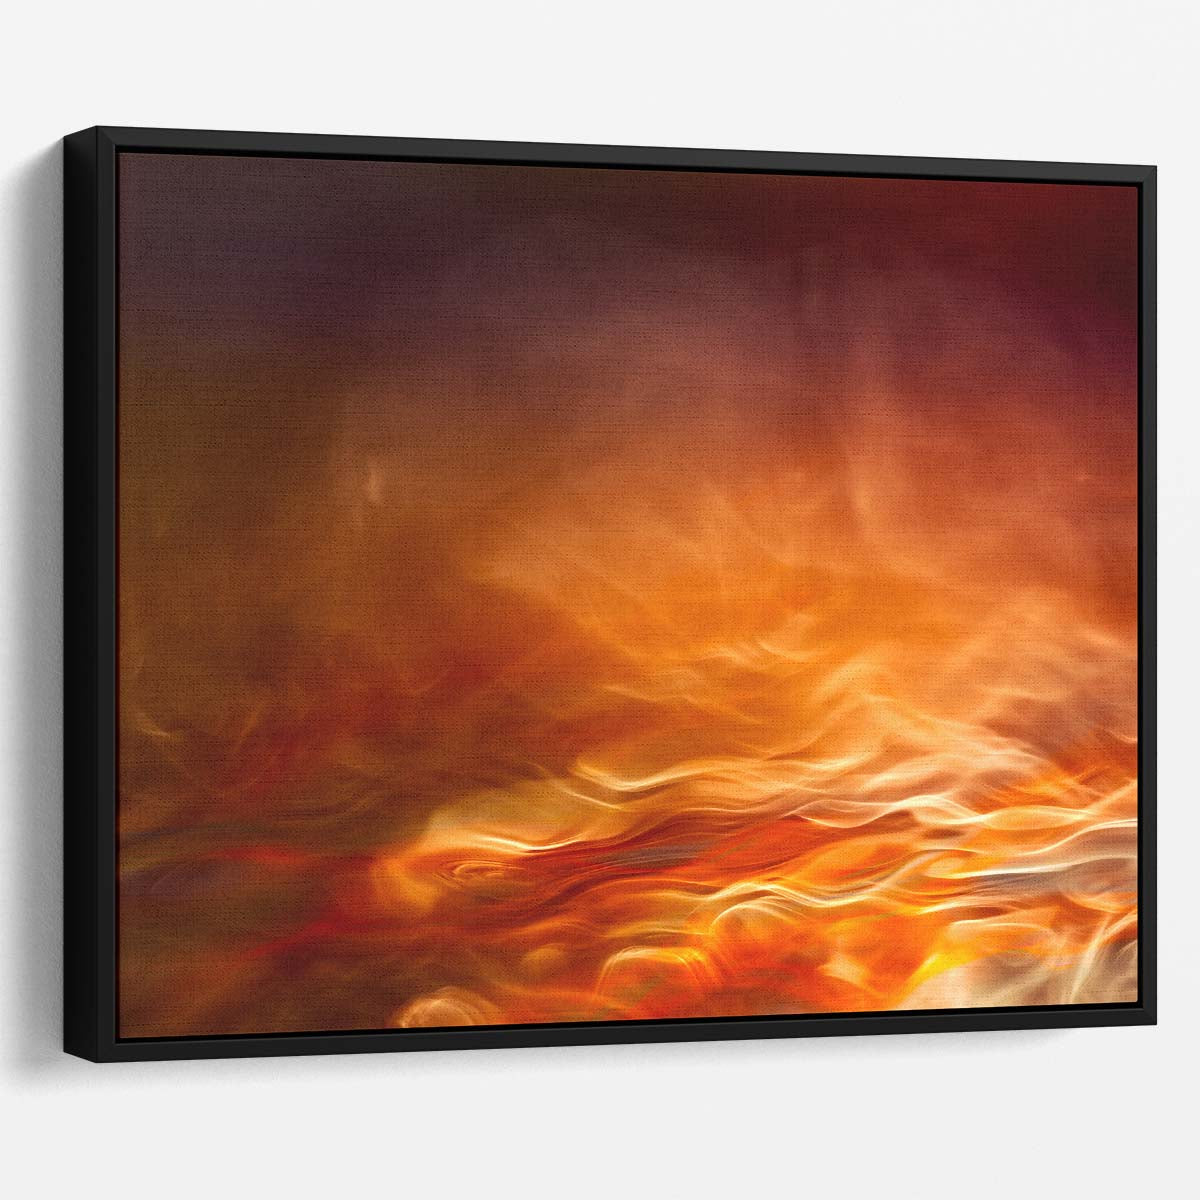 Romantic Fire & Water Flames Abstract Wall Art by Luxuriance Designs. Made in USA.